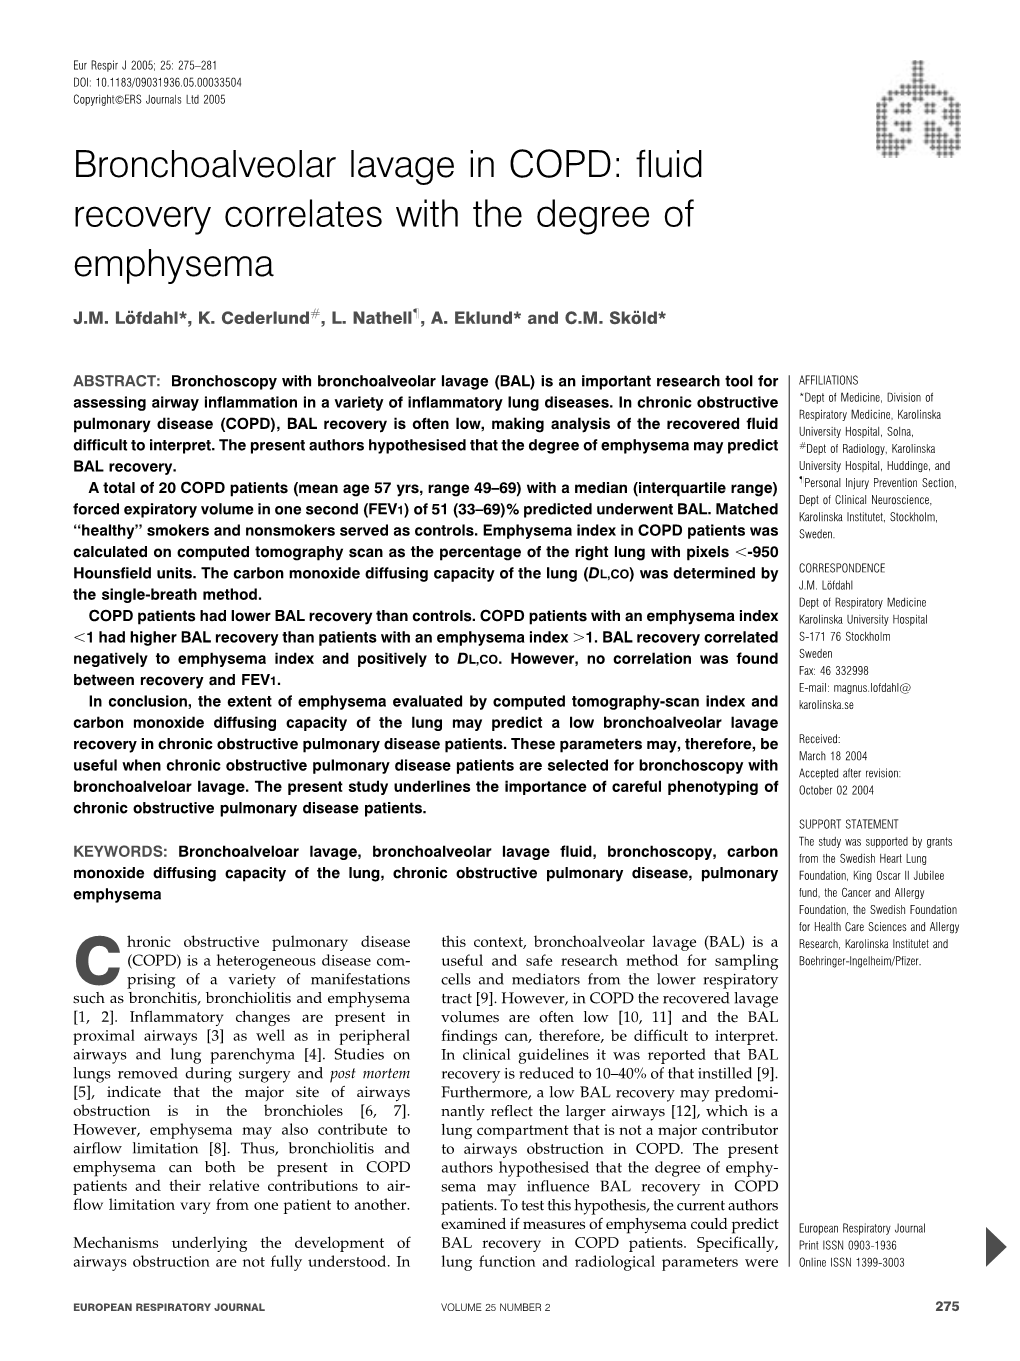 Bronchoalveolar Lavage in COPD: Fluid Recovery Correlates with the Degree of Emphysema